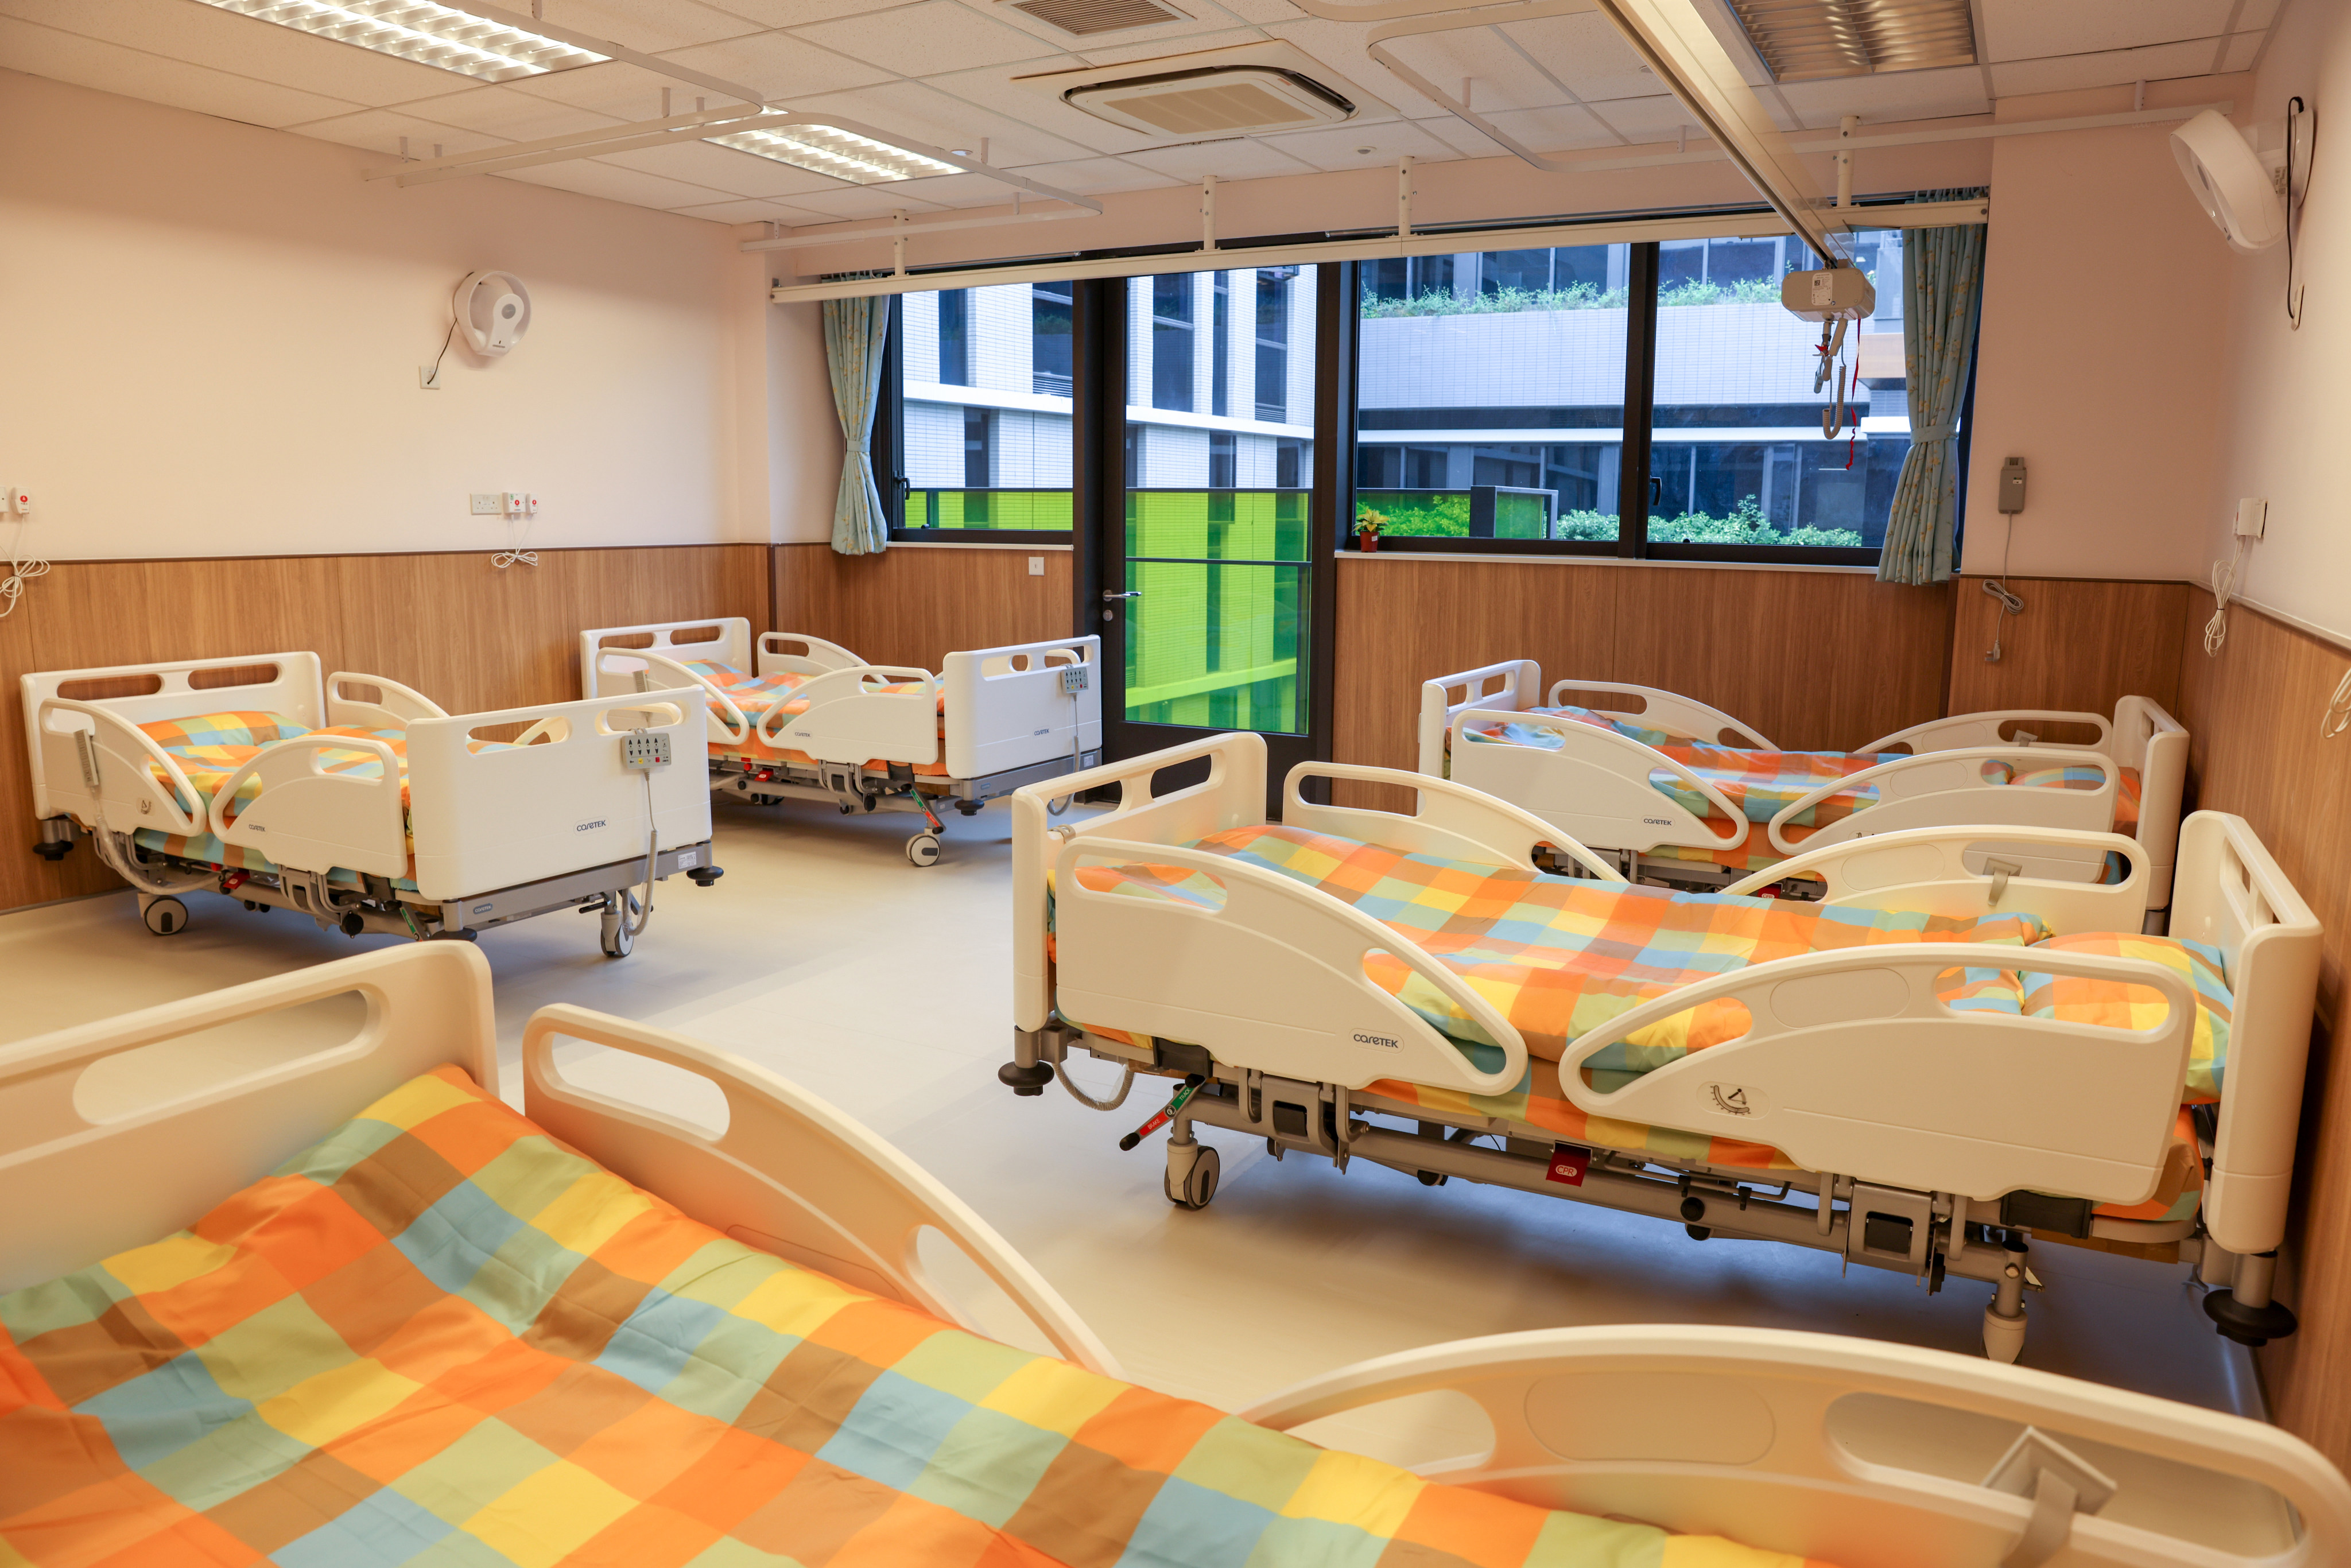 Beds at the Siu Lam Integrated Rehabilitation Services Complex. The site has seven units offering 1,710 service places – 1,150 for residential care and 560 for day training and vocational rehabilitation. Photo: Yik Yeung-man